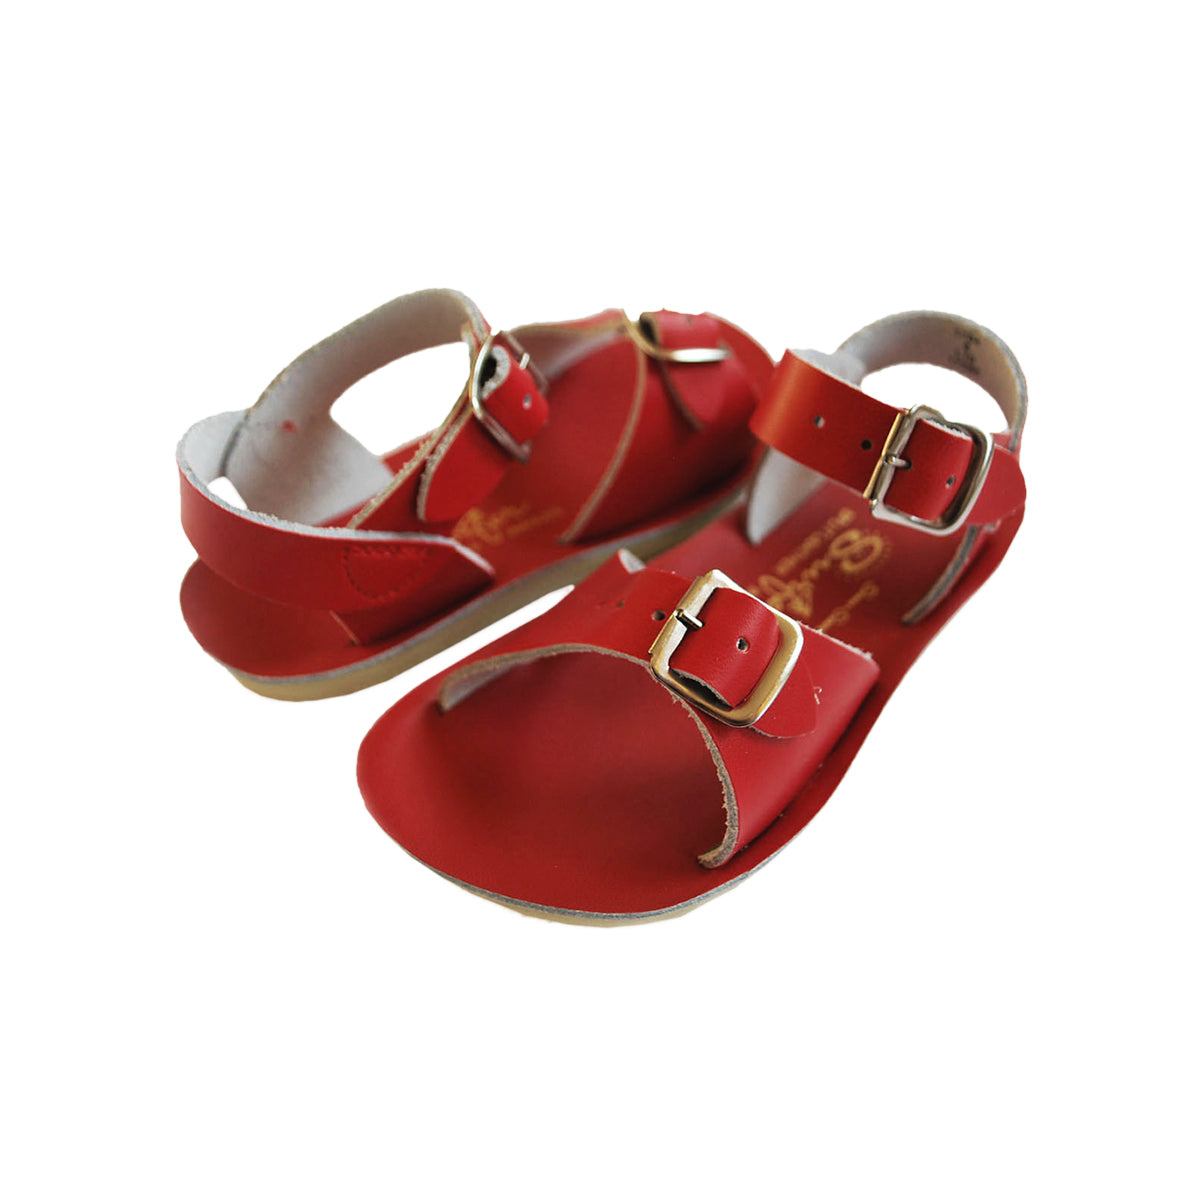 Surfer Sandals in Red by Salt-Water – Junior Edition